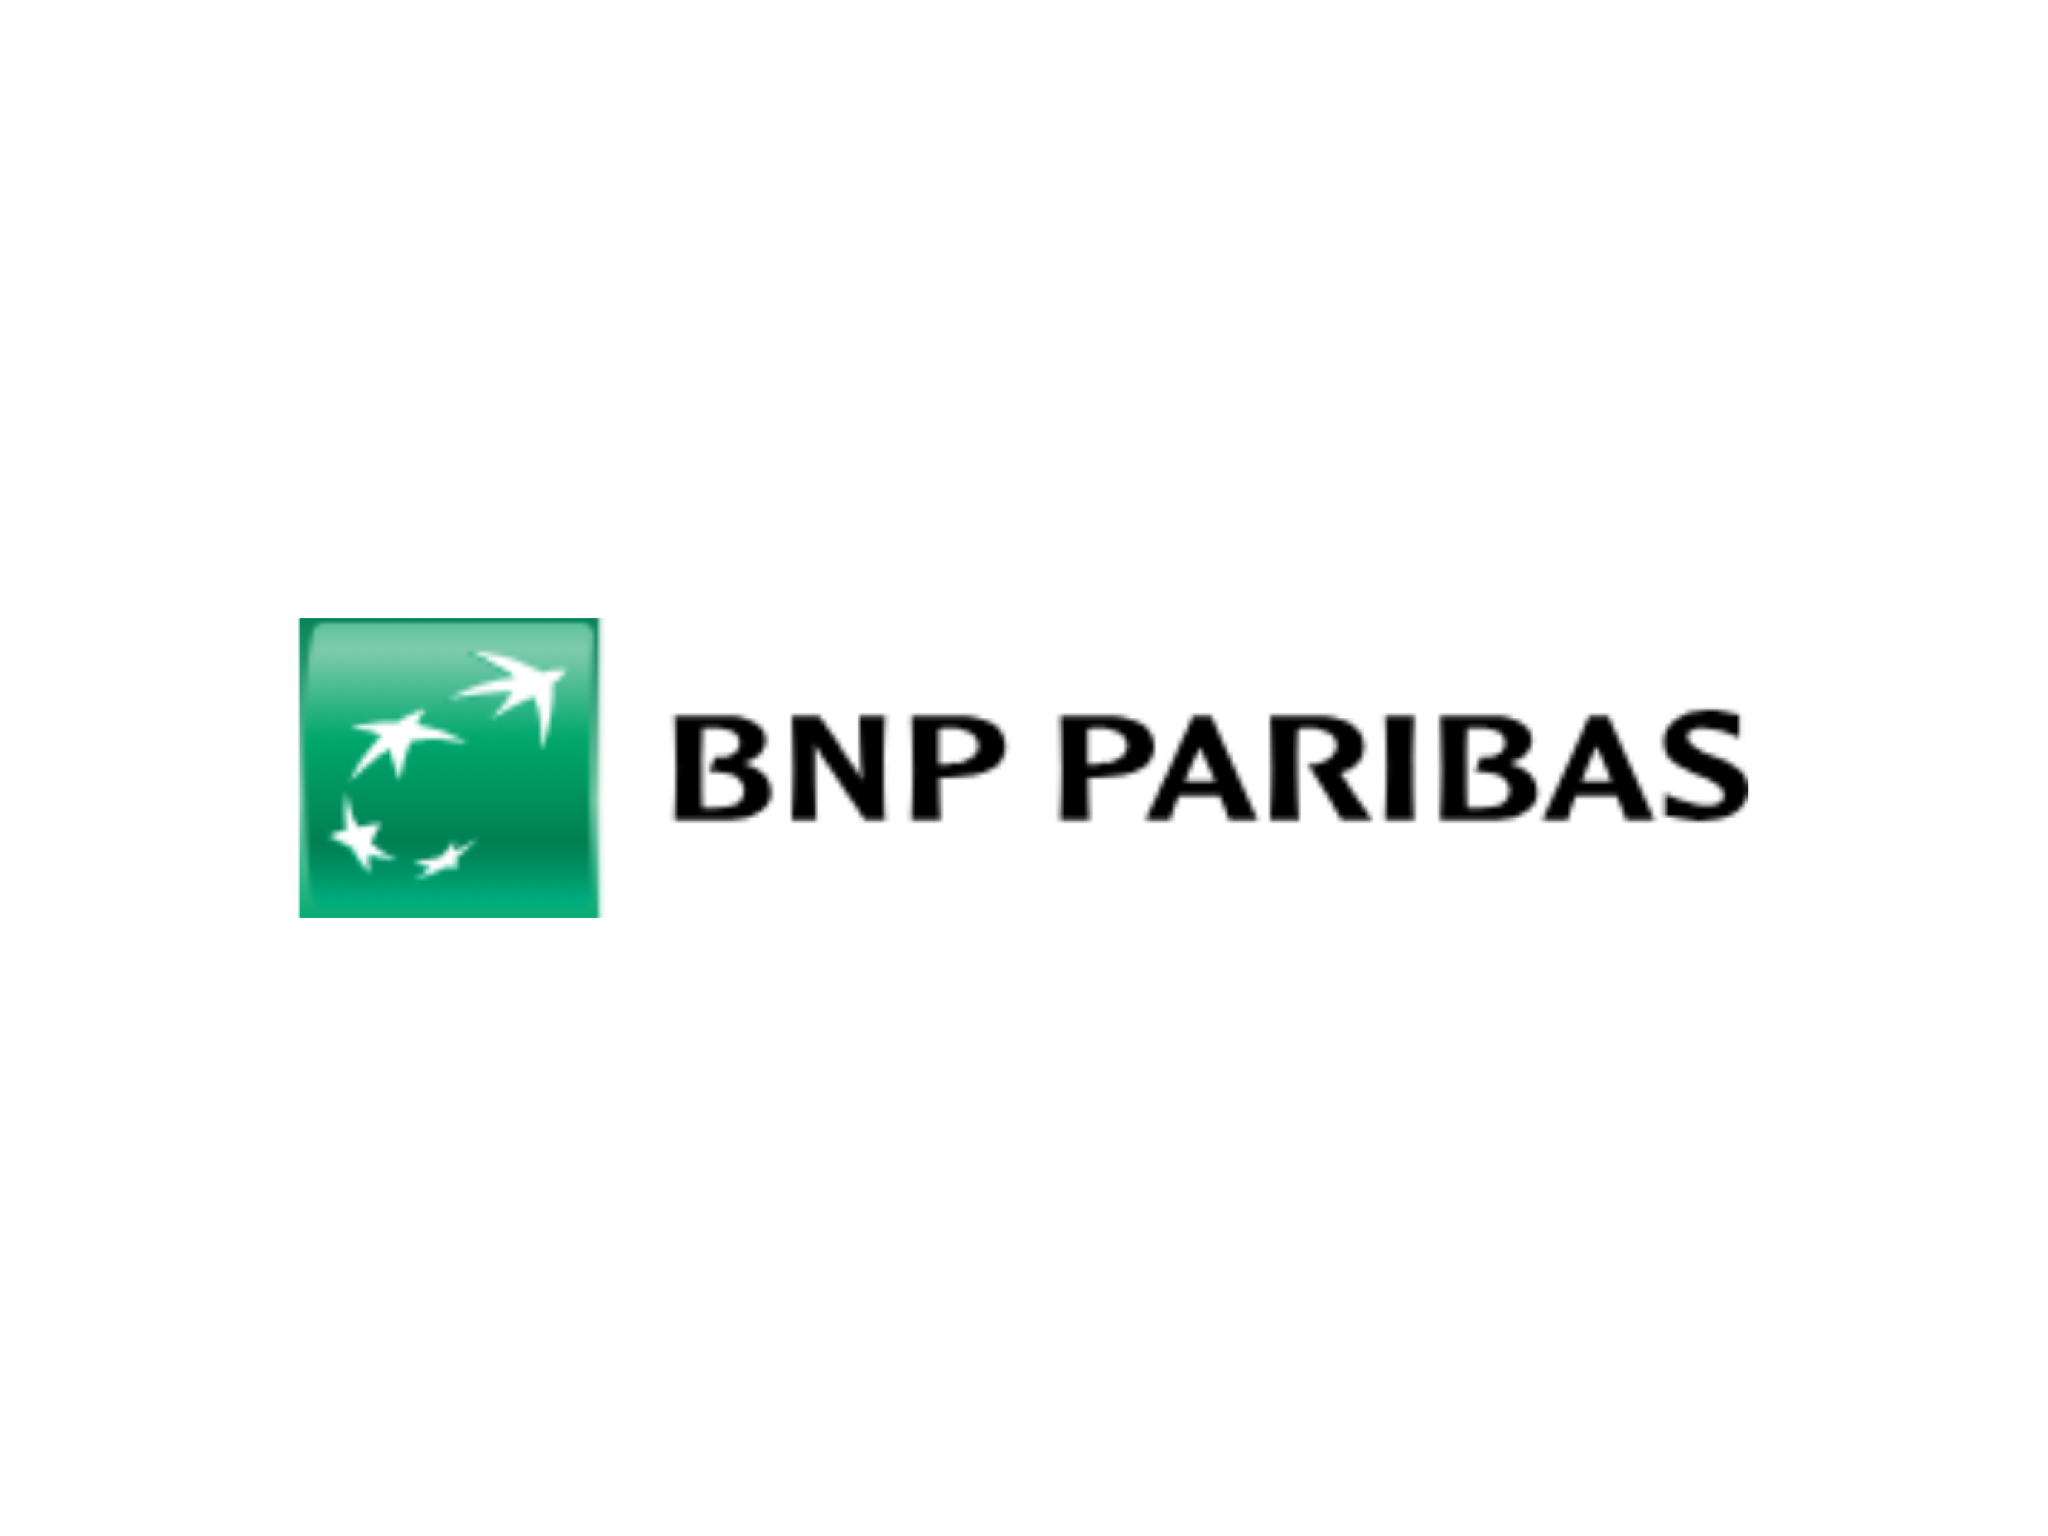  bnp-paribas-faces-the-music---reportedly-settles-case-over-swiss-franc-loan 